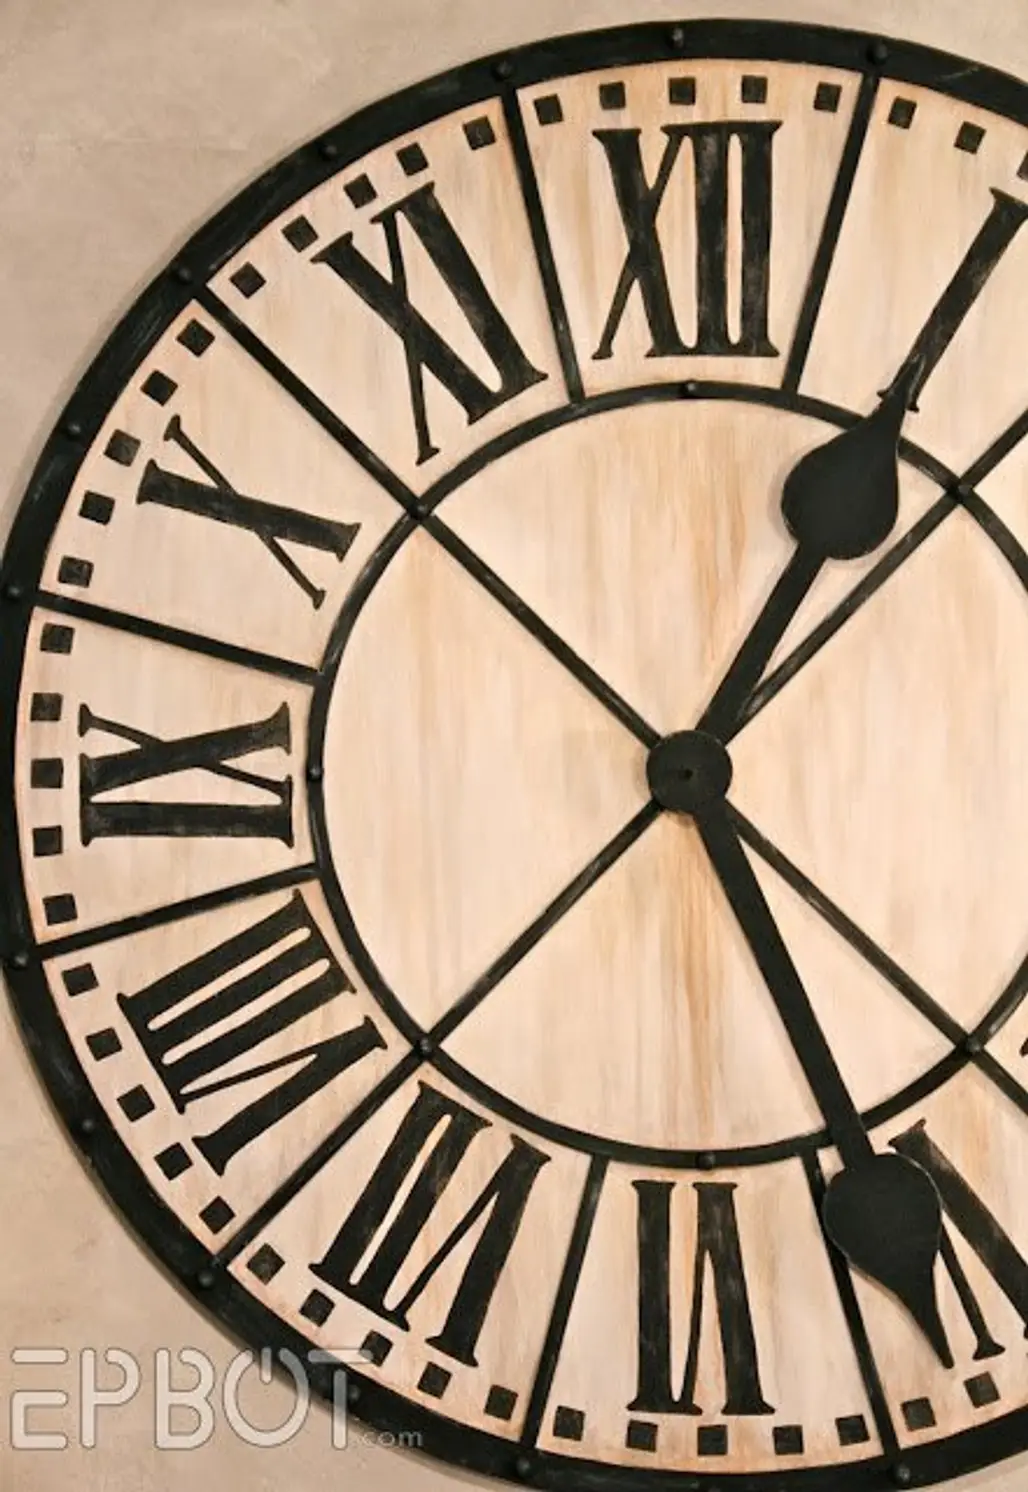 Giant Tower Clock